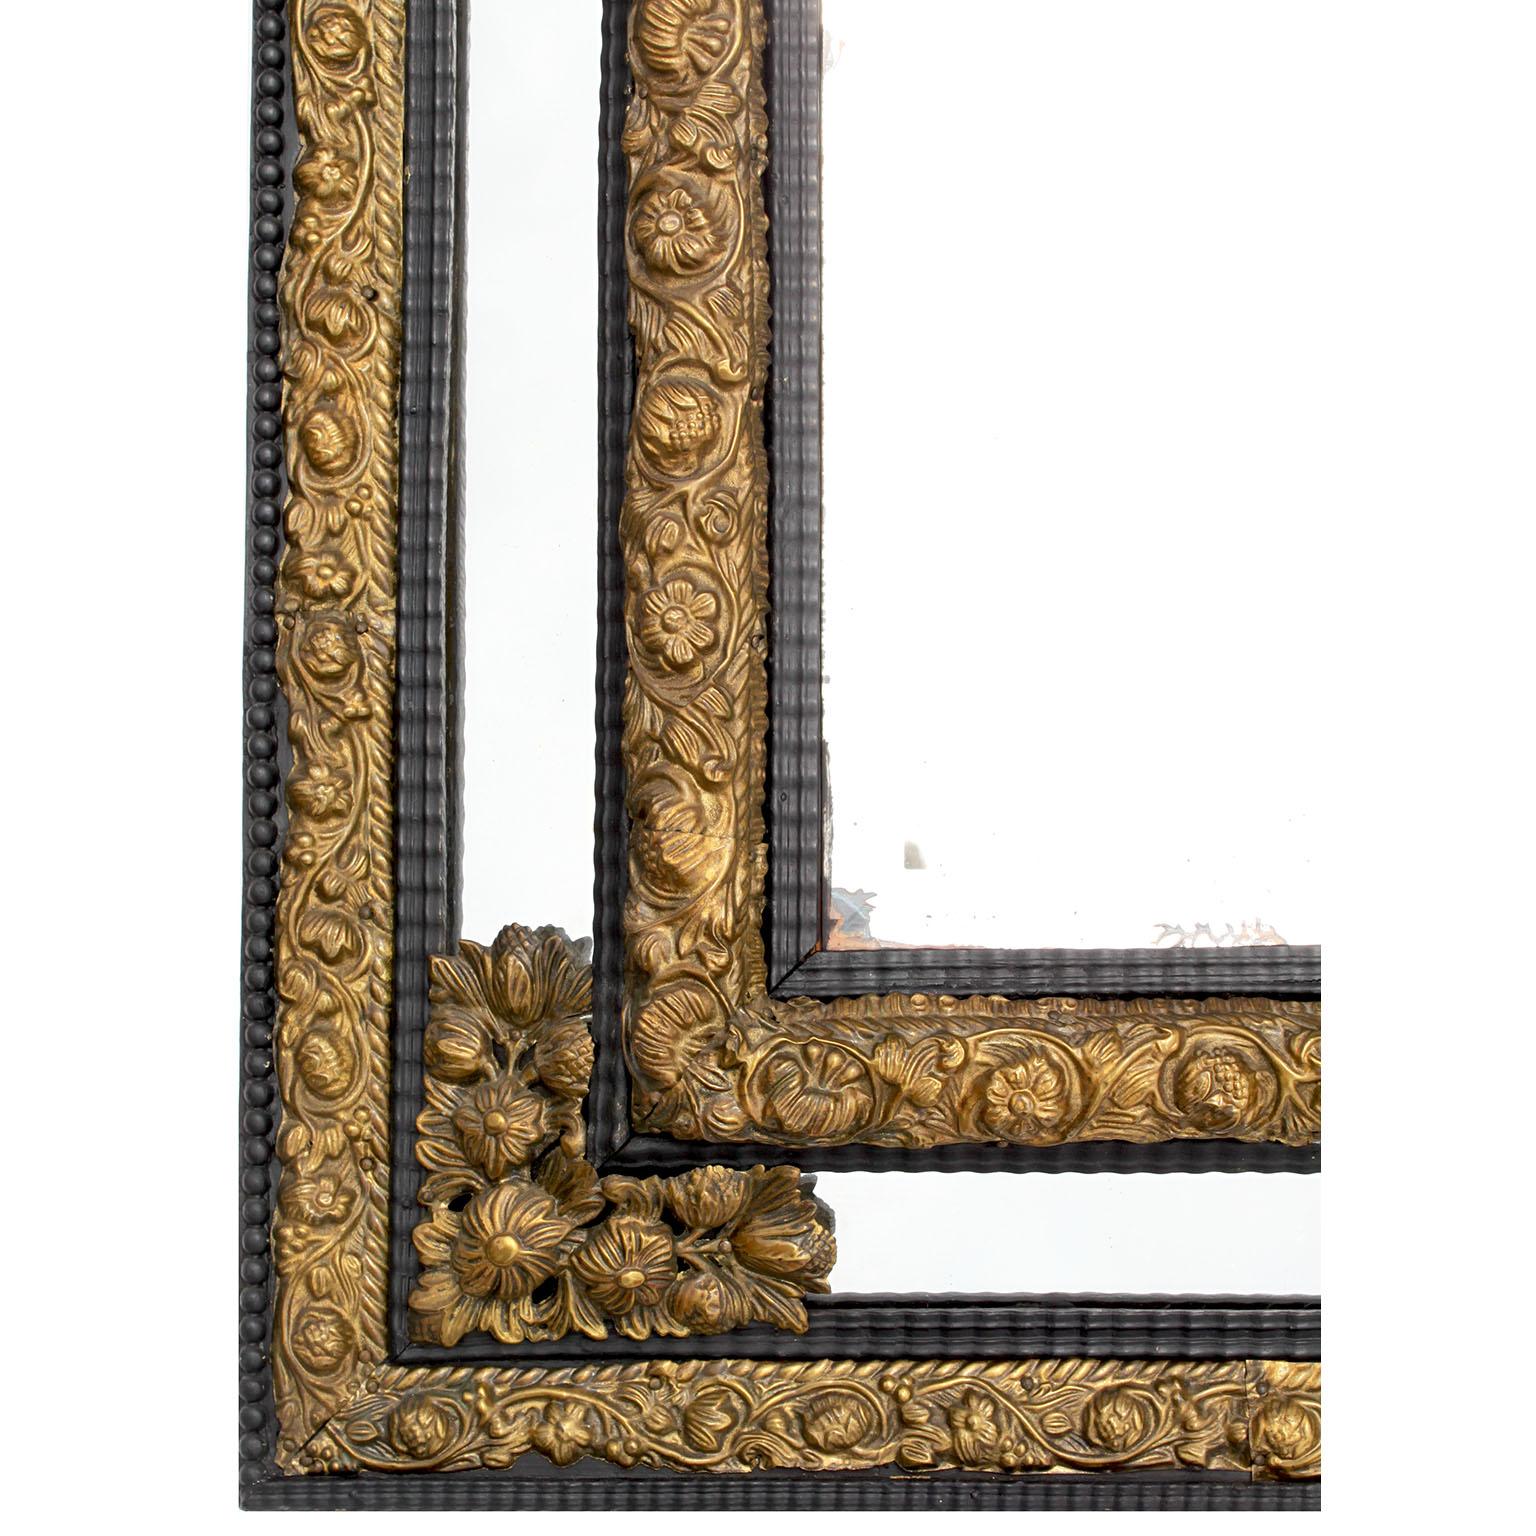 A French 19th Century Baroque Style Hammered Gilt-Brass Repoussé Mirror Frame For Sale 1